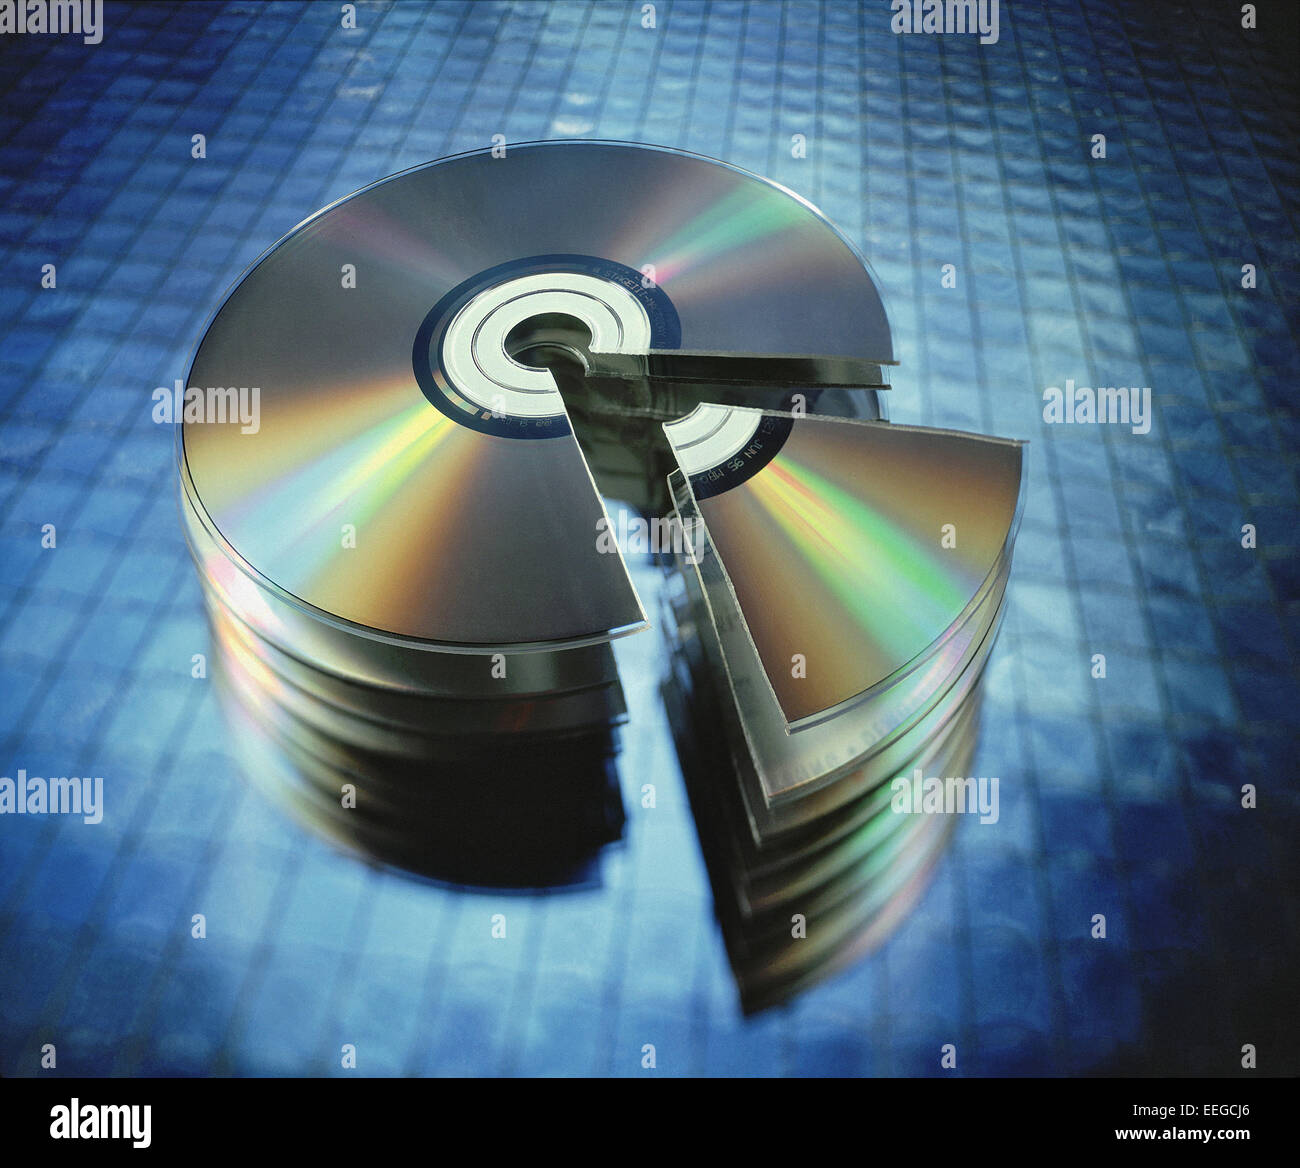 Hamburg, Germany, CD-Rom stack with cut-out circle segment Stock Photo